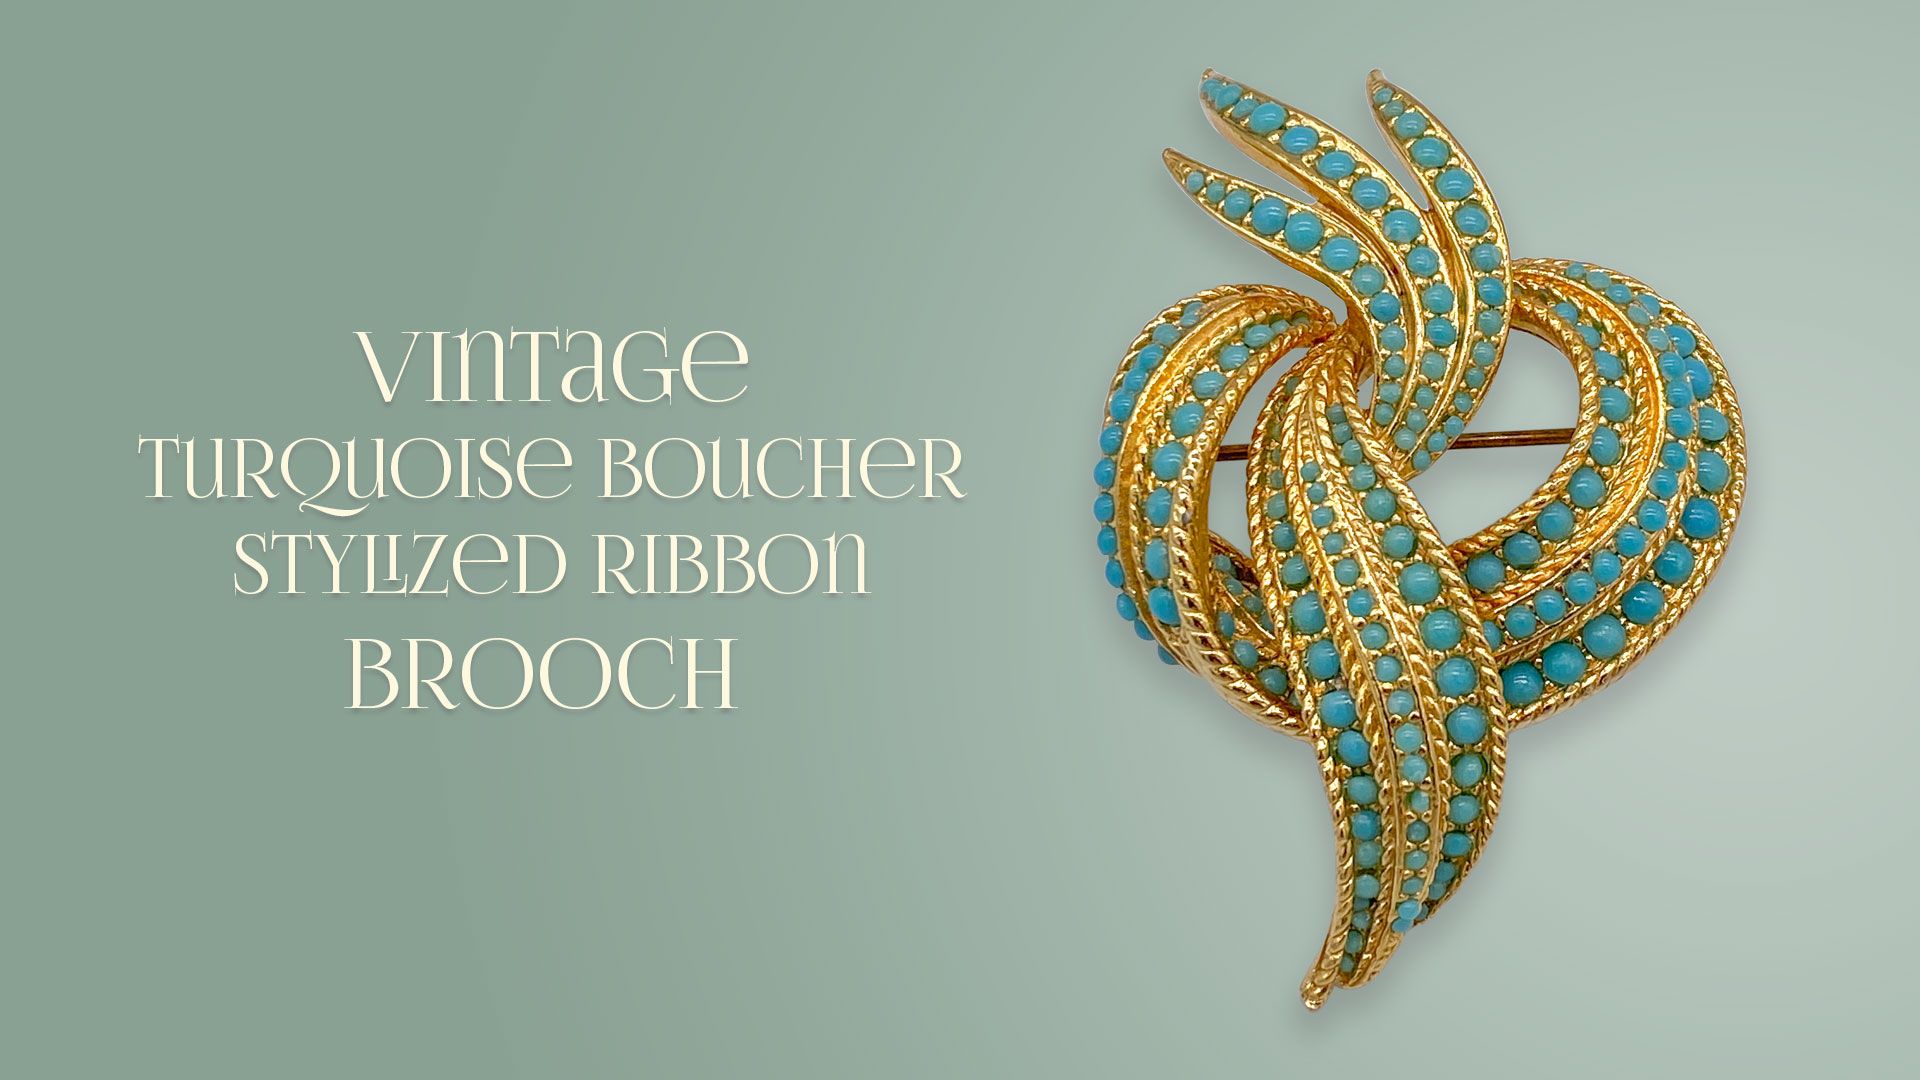 Vintage Turquoise Boucher Stylized Ribbon Brooch